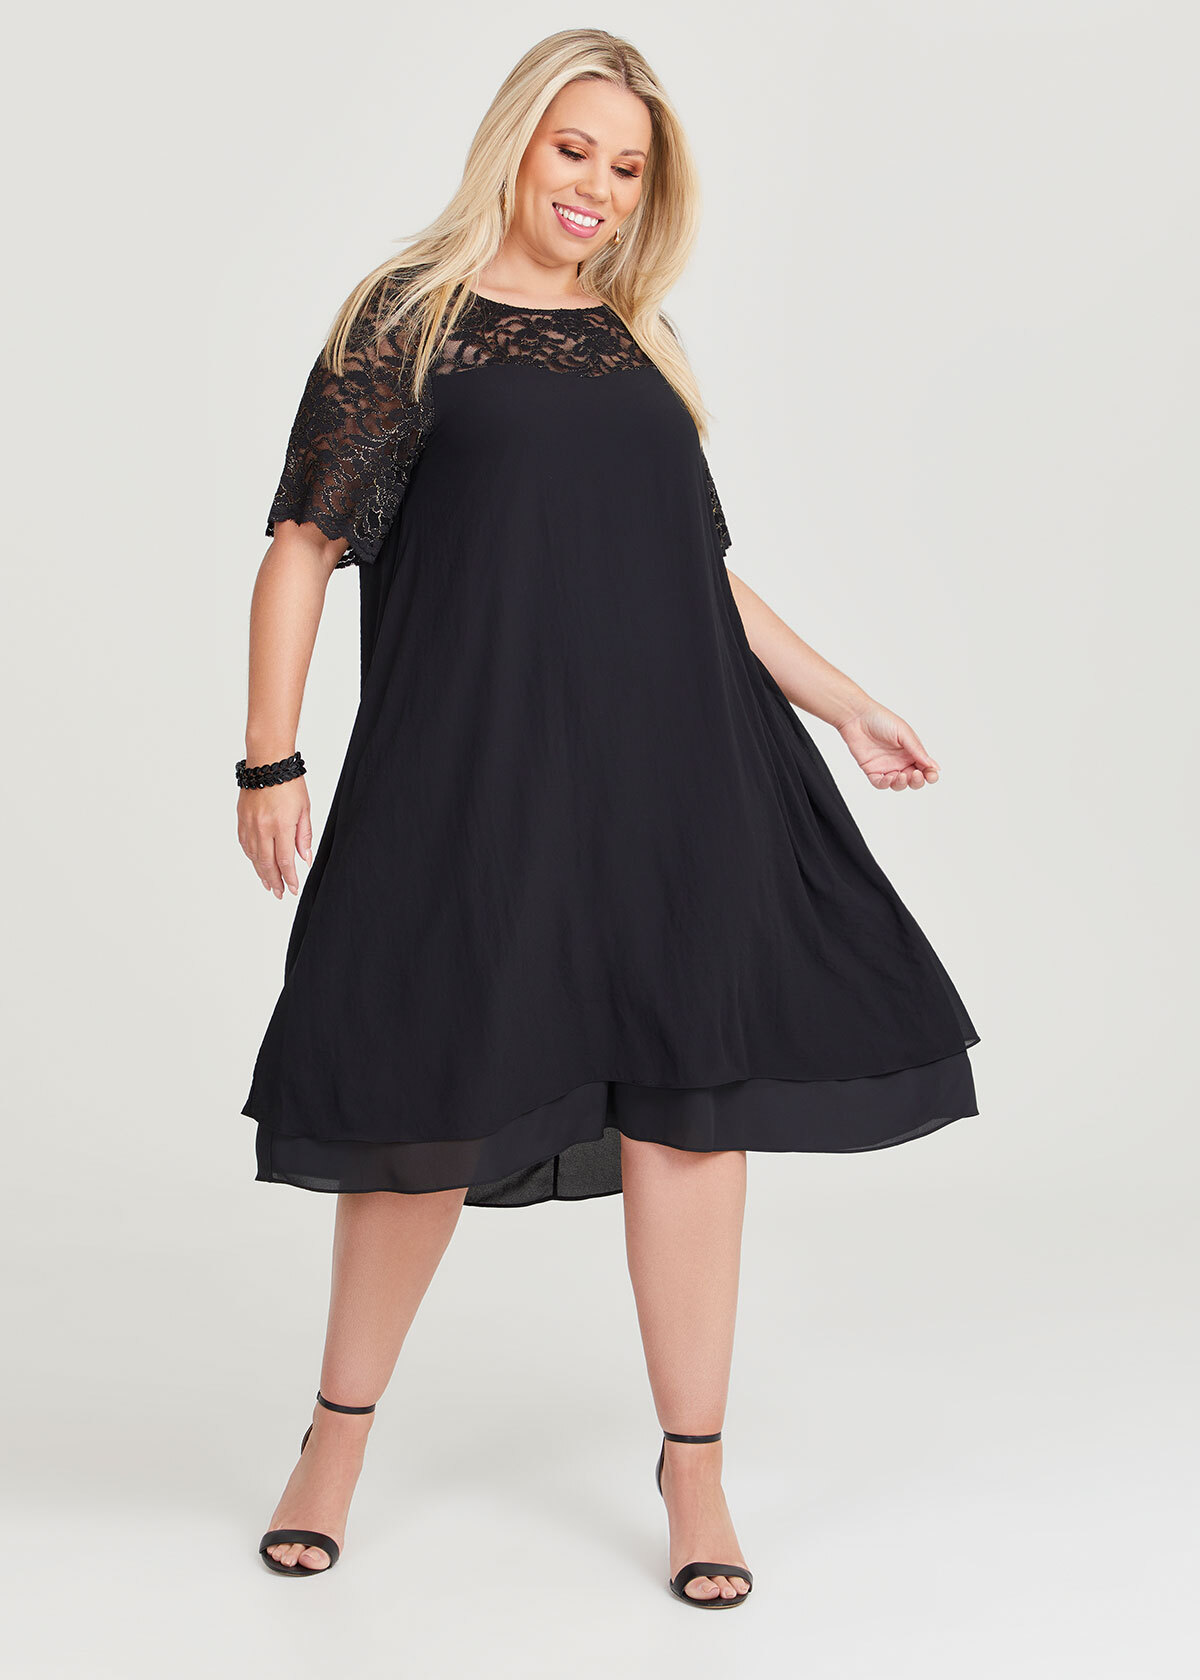 Shop Plus Size Lily Swing Cocktail Dress in Black | Sizes 12-30 ...